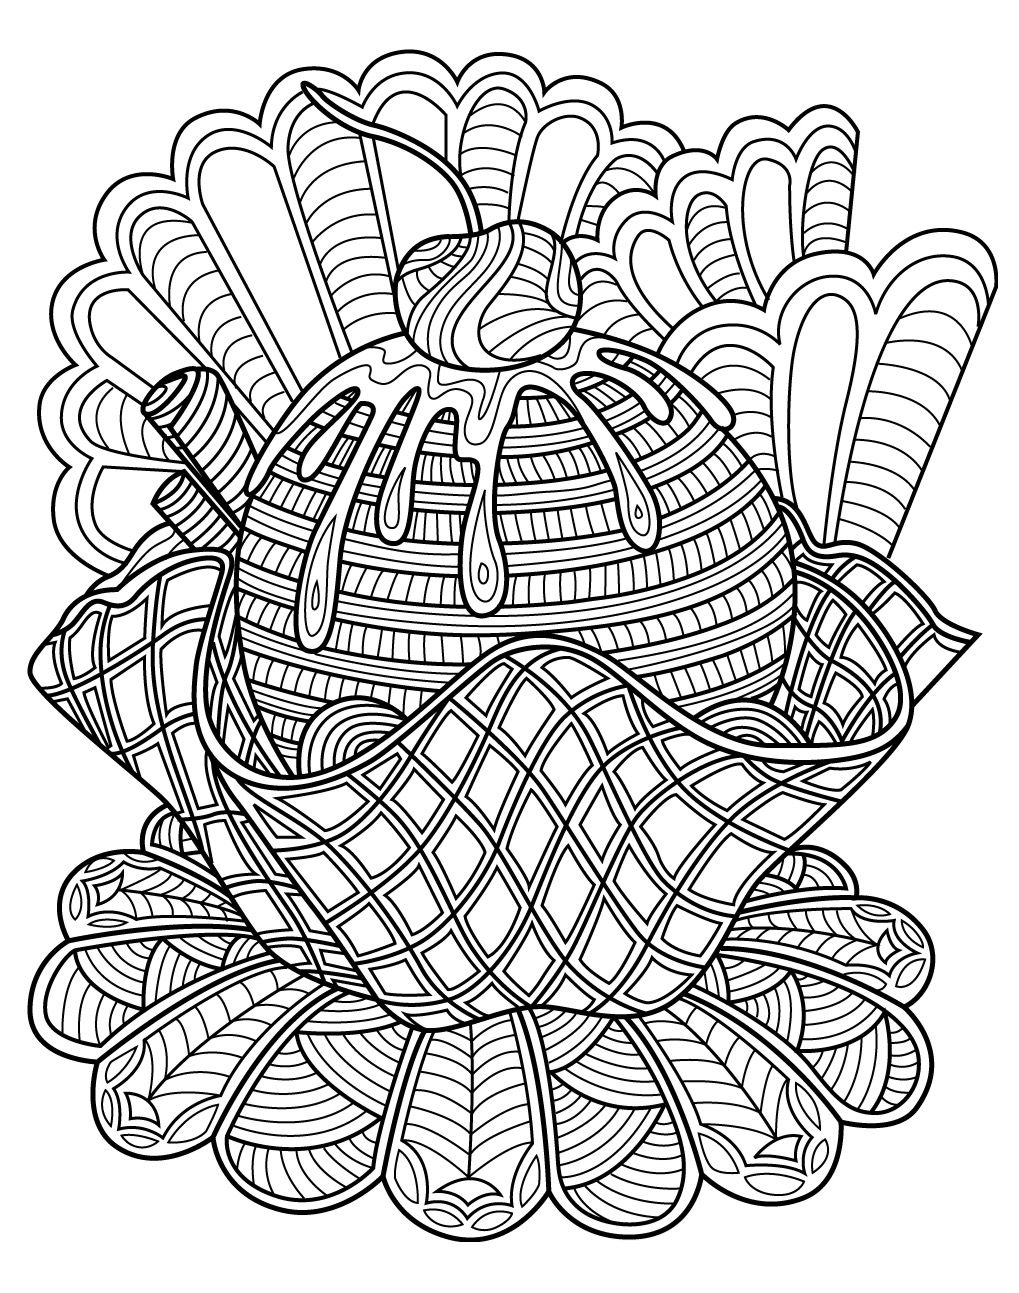 Sweets coloring page | Colorish: free coloring app for adults by  GoodSoftTech | Coloring pages, Monster coloring pages, Food coloring pages